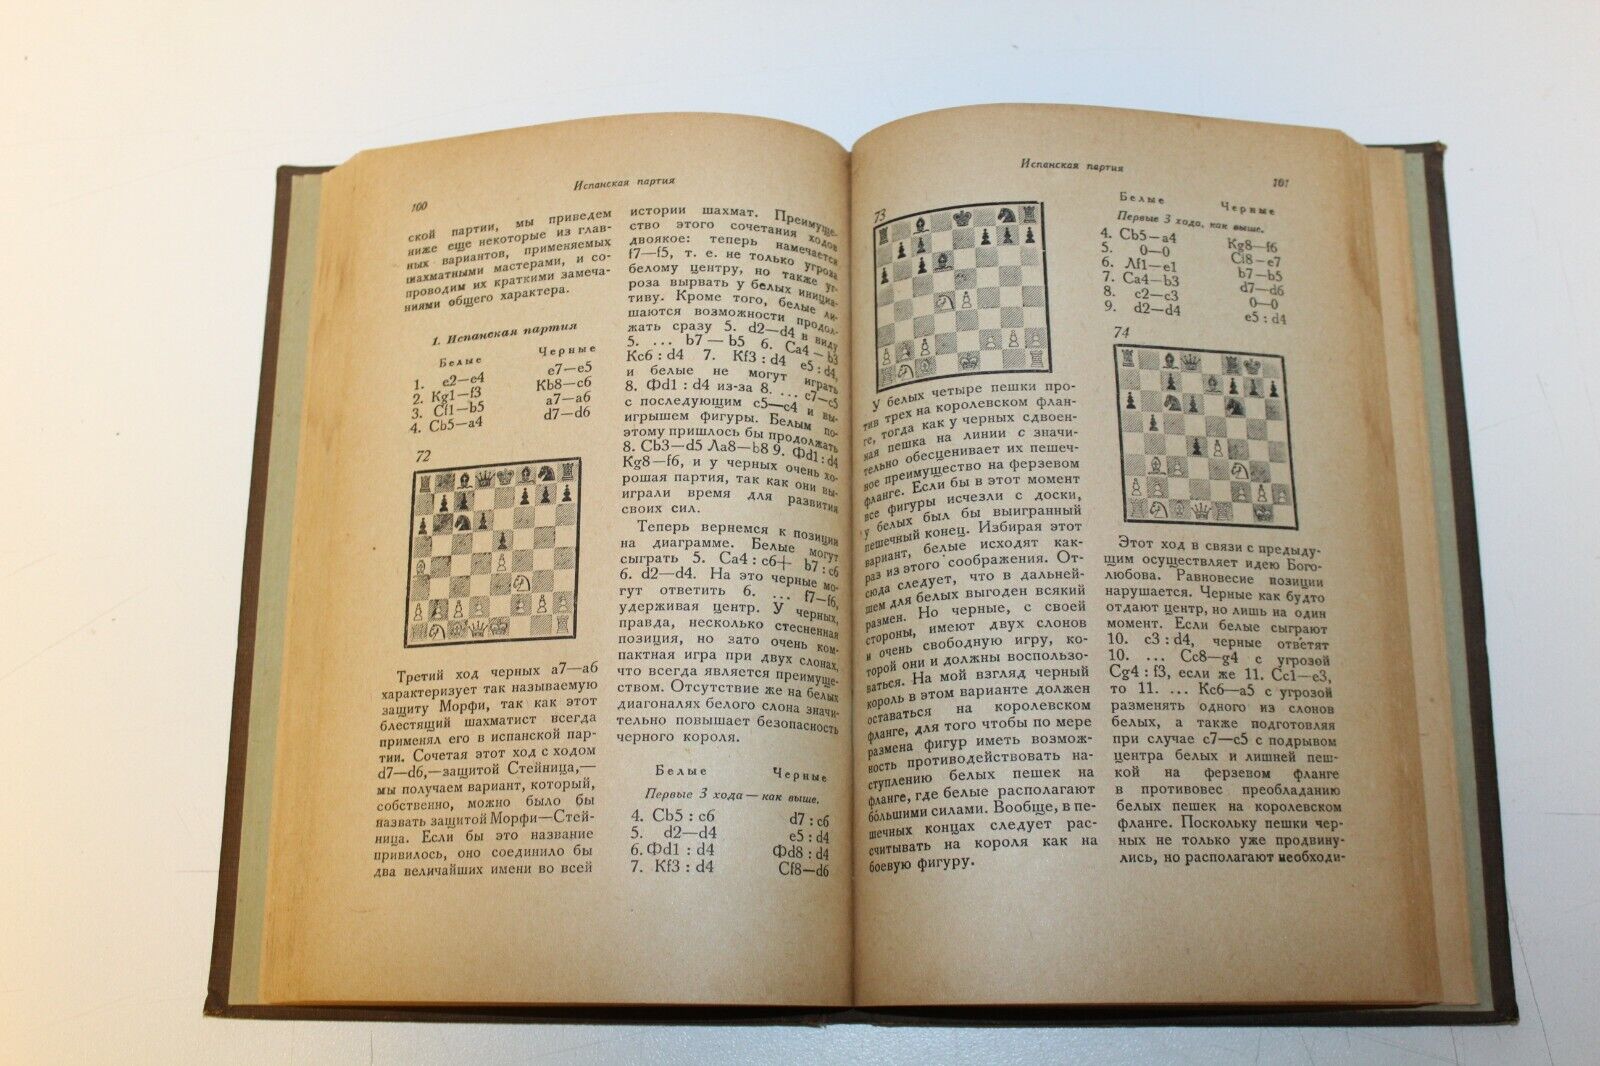 10875.Antique Russian Chess Book: J. Capablanca. The textbook of chess game. 1936